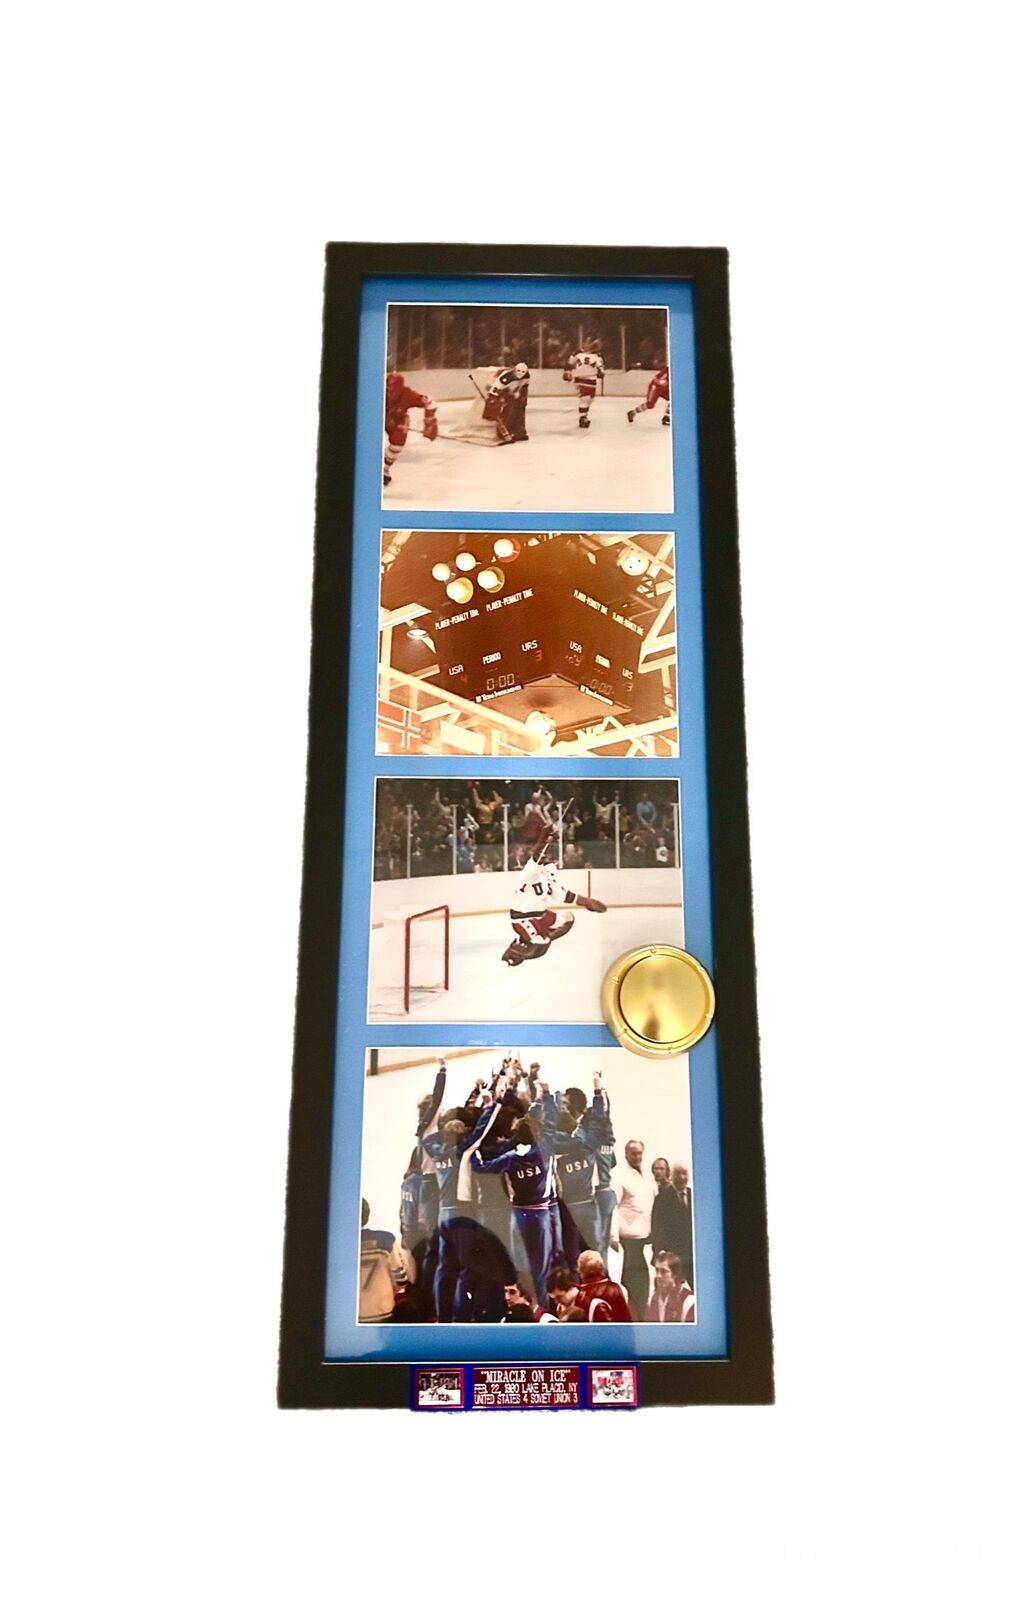 Official Miracle on Ice 4- 8 x 10 Picture Frame with last 30 seconds of the Game